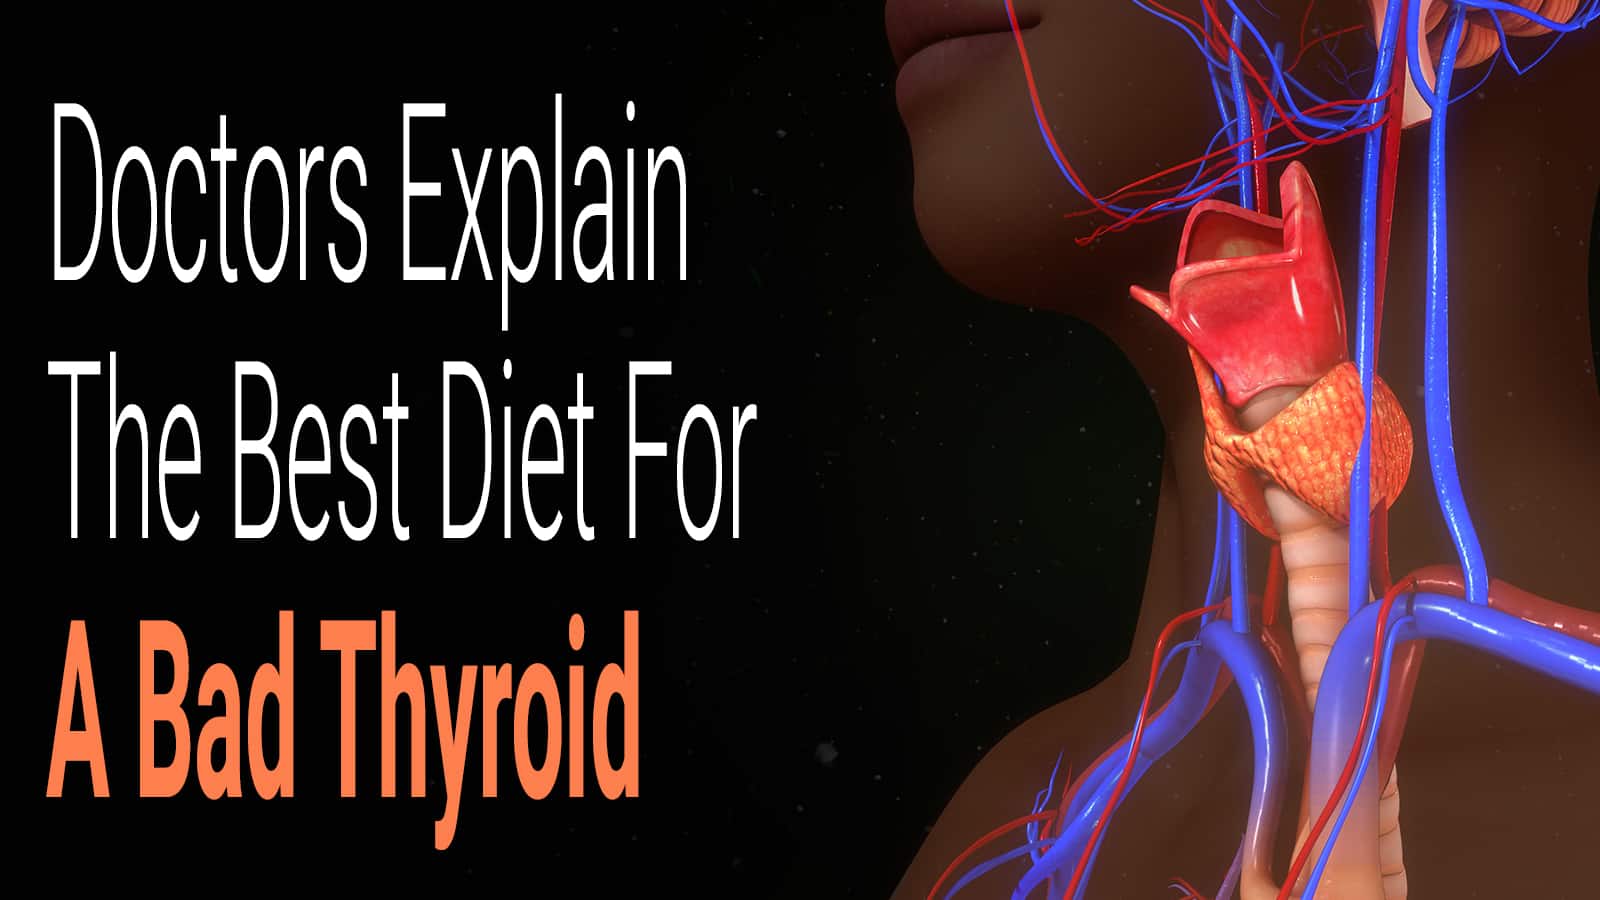 Doctors Explain The Best Diet For A Bad Thyroid